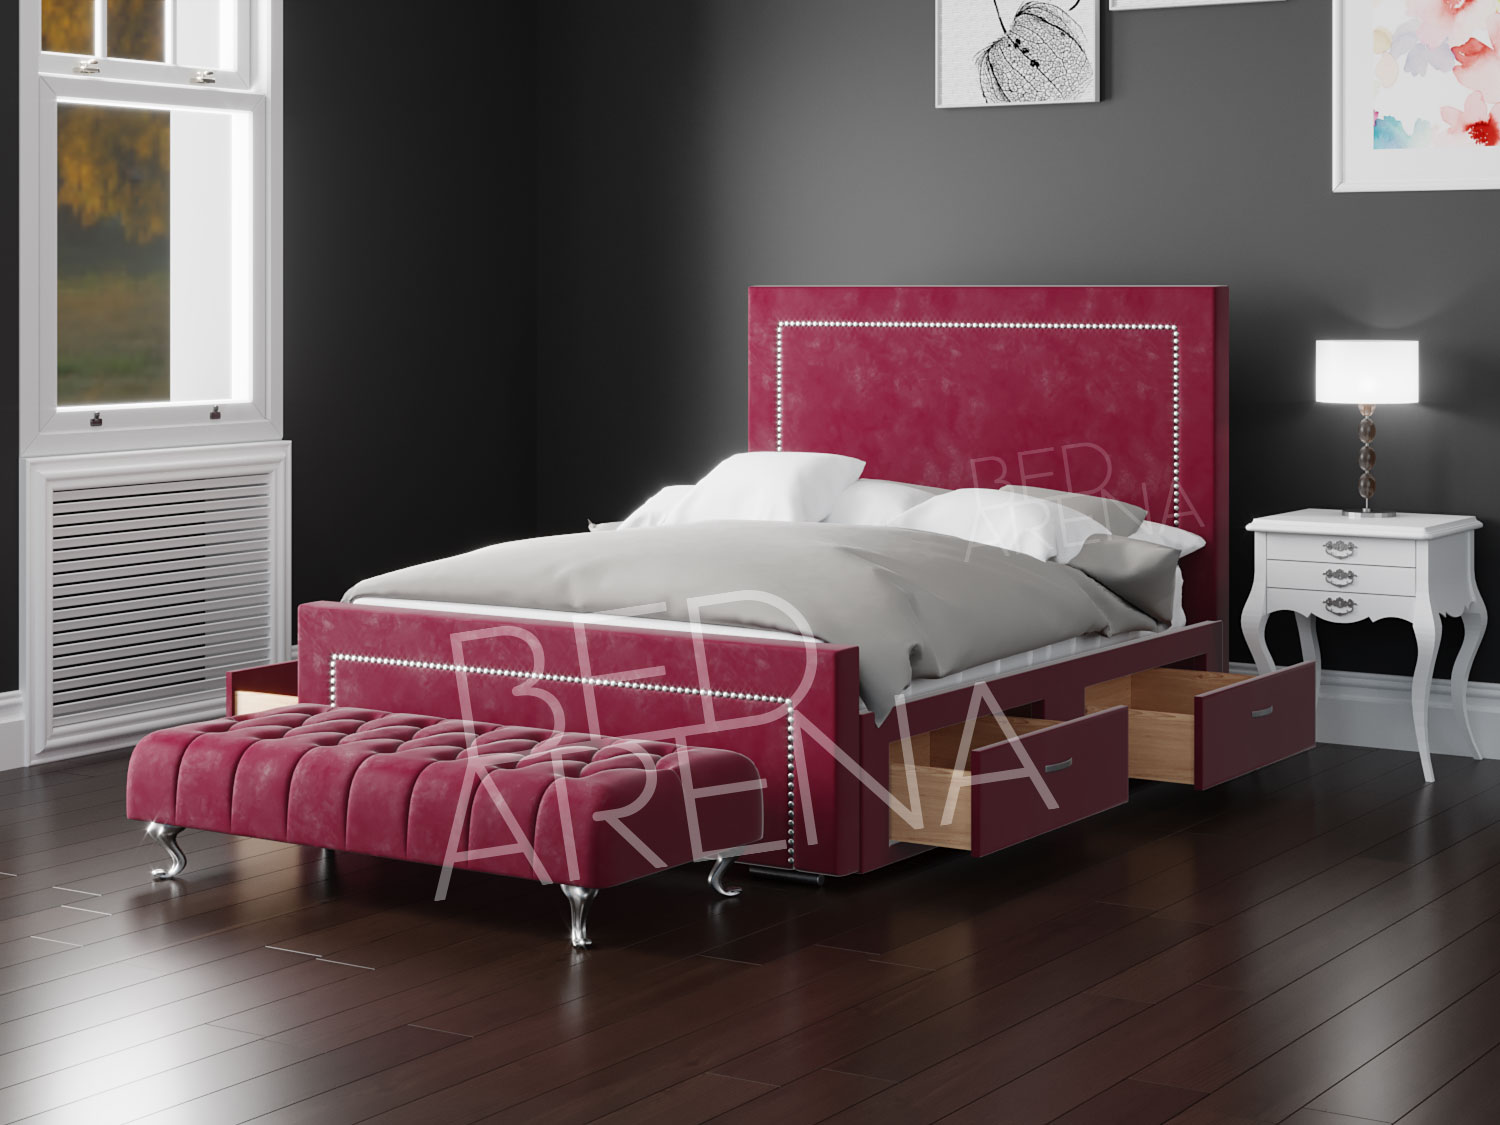 Red coloured upholstered bed in a dark walled room.